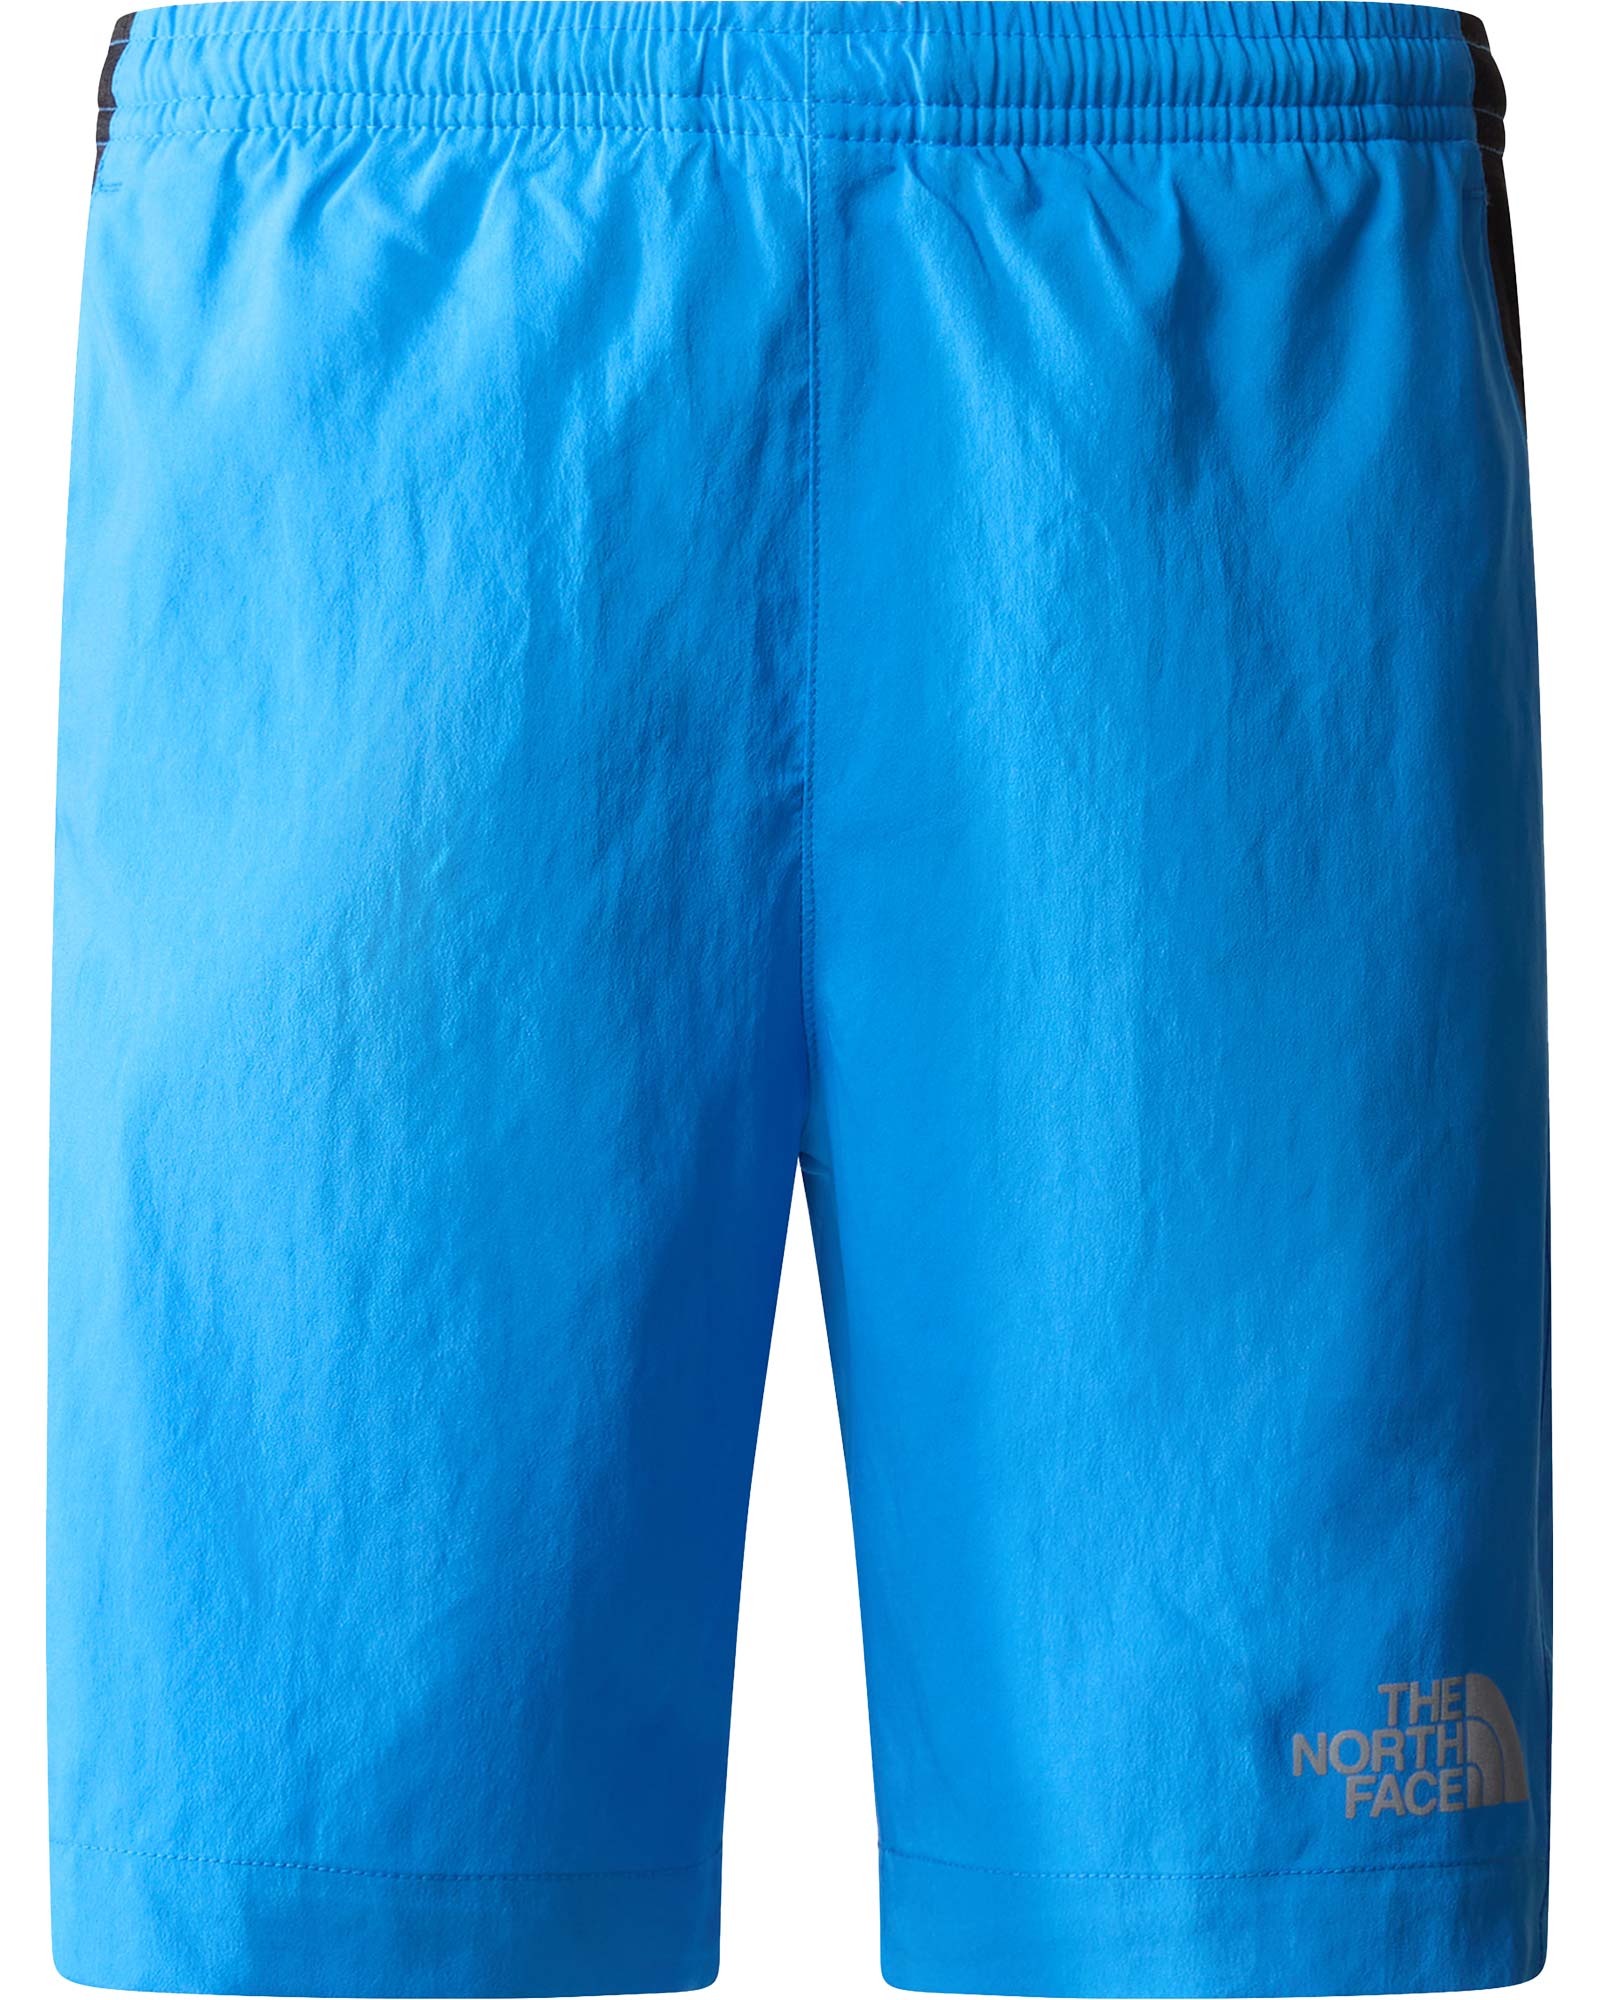 The North Face Boy’s Never Stop Shorts - Super Sonic Blue S